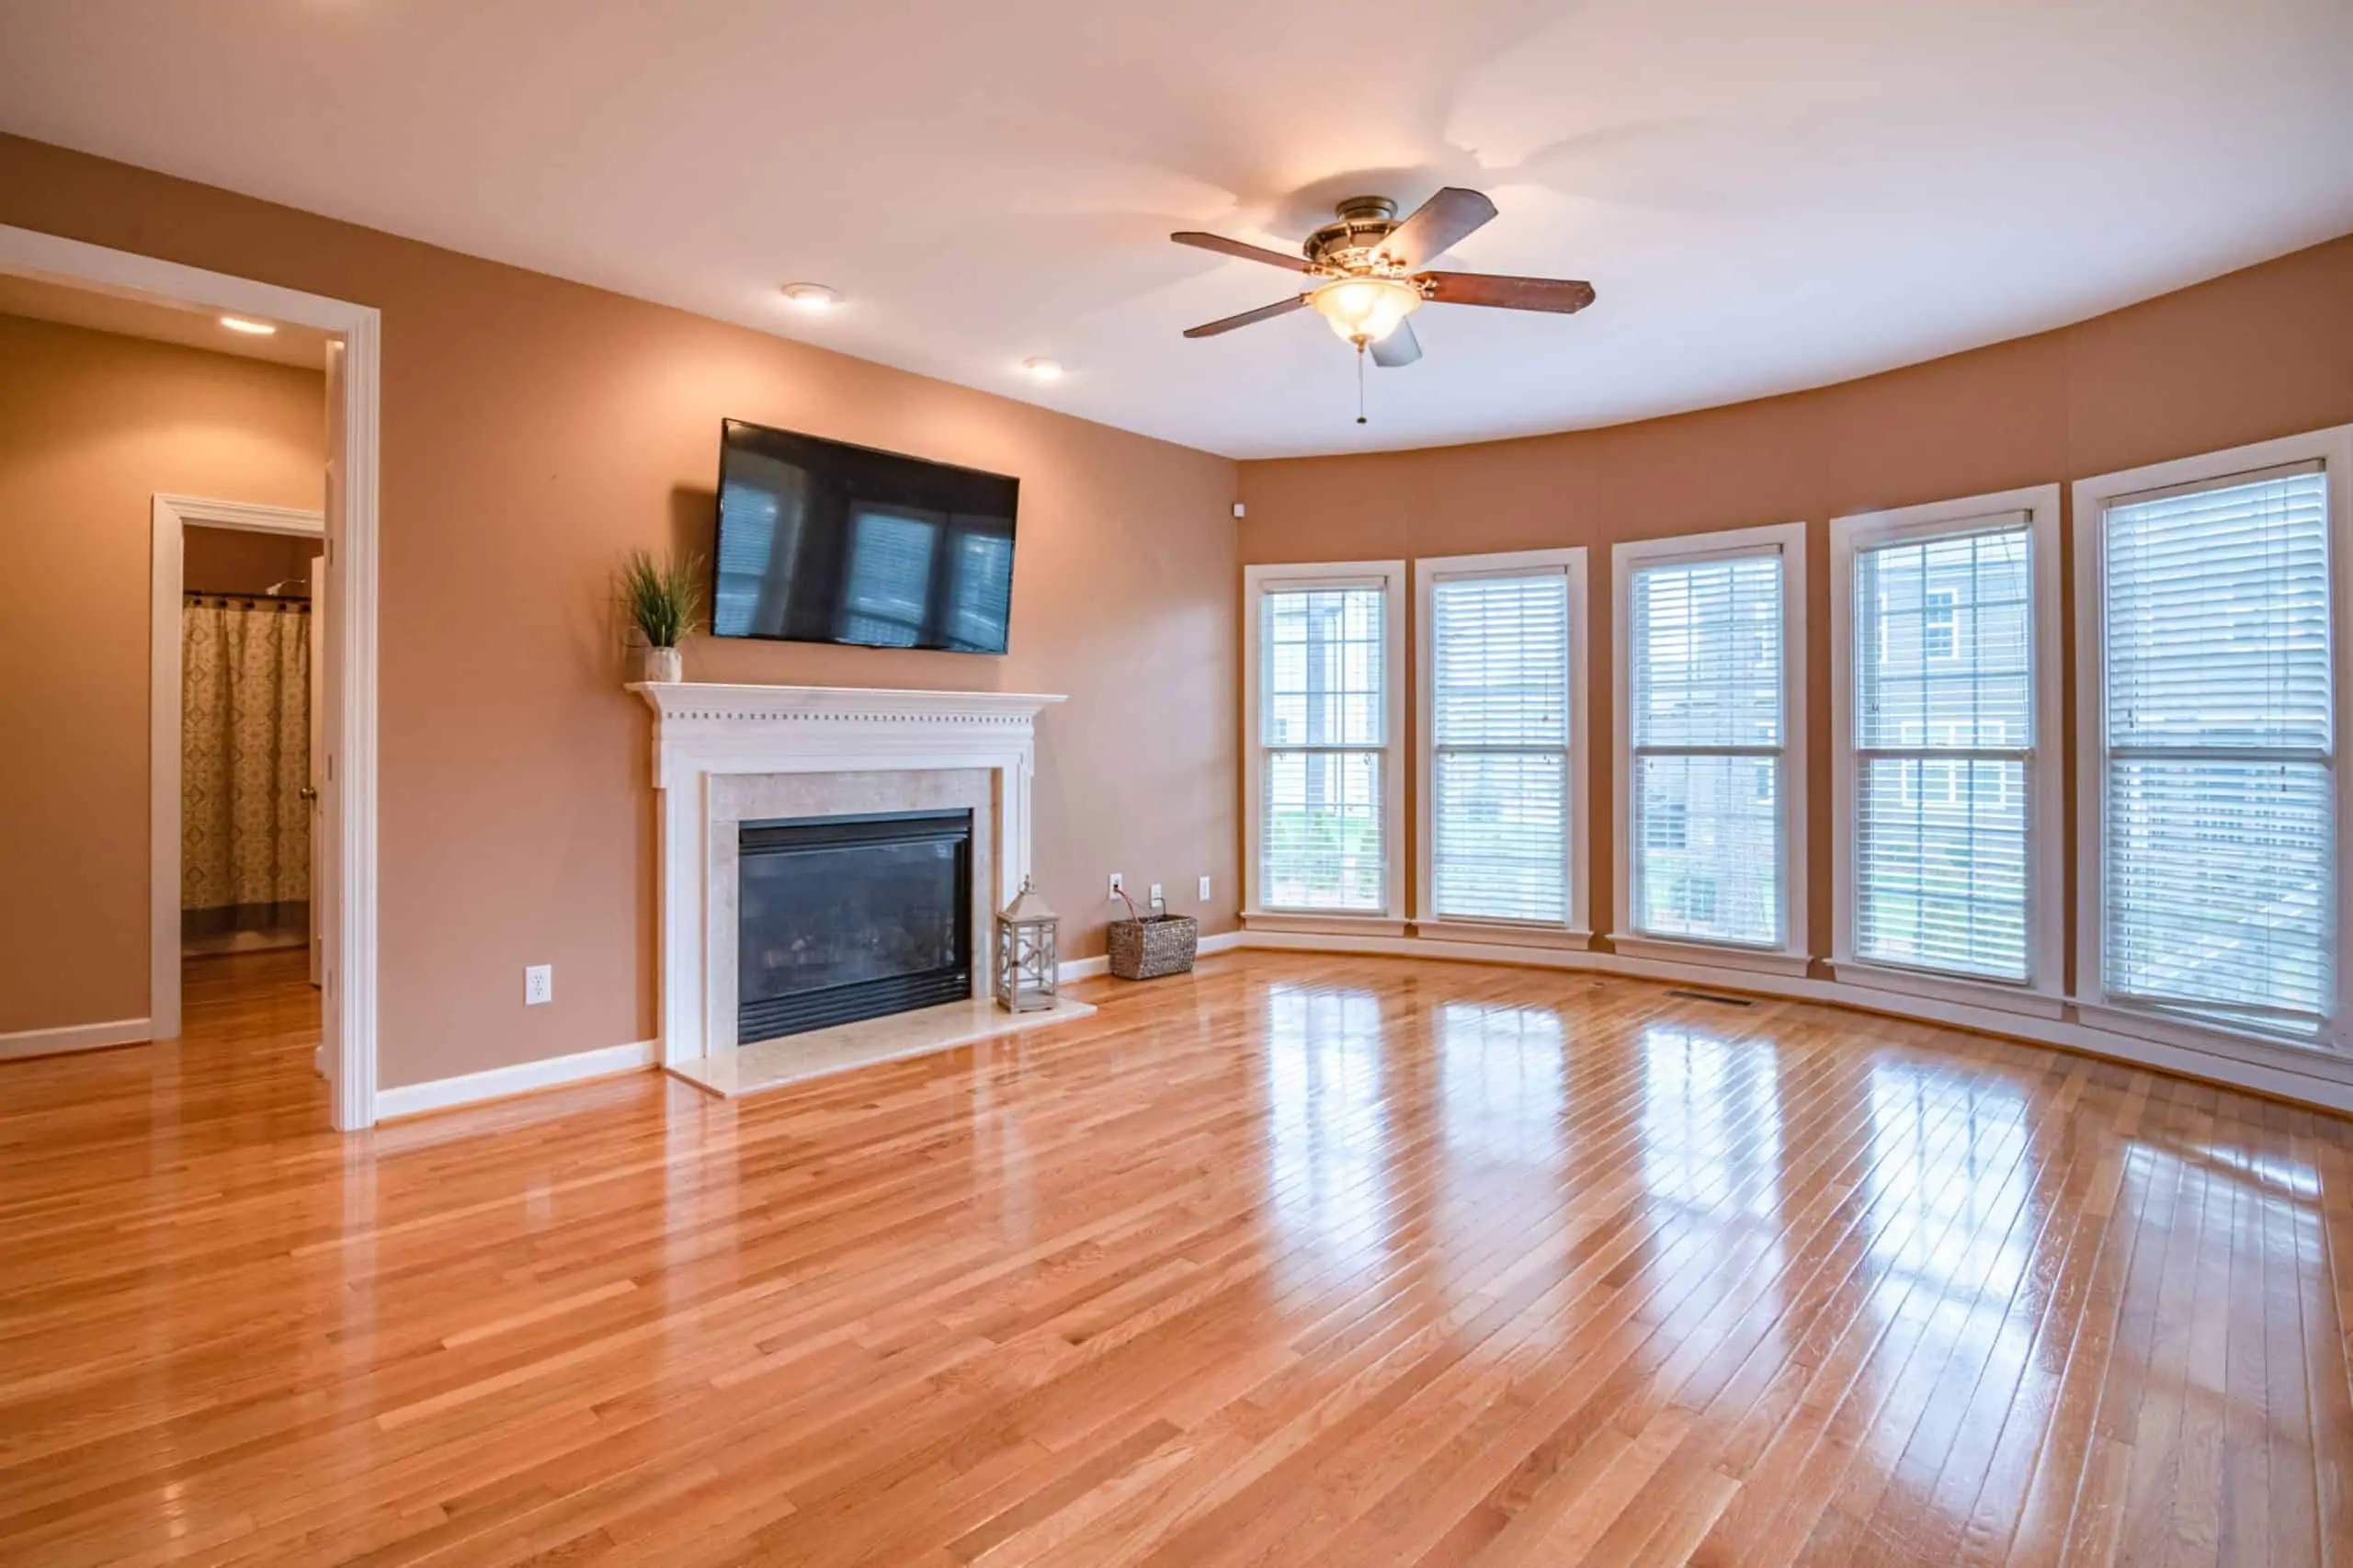 A living room with multiple overhead lights and hardwood flooring